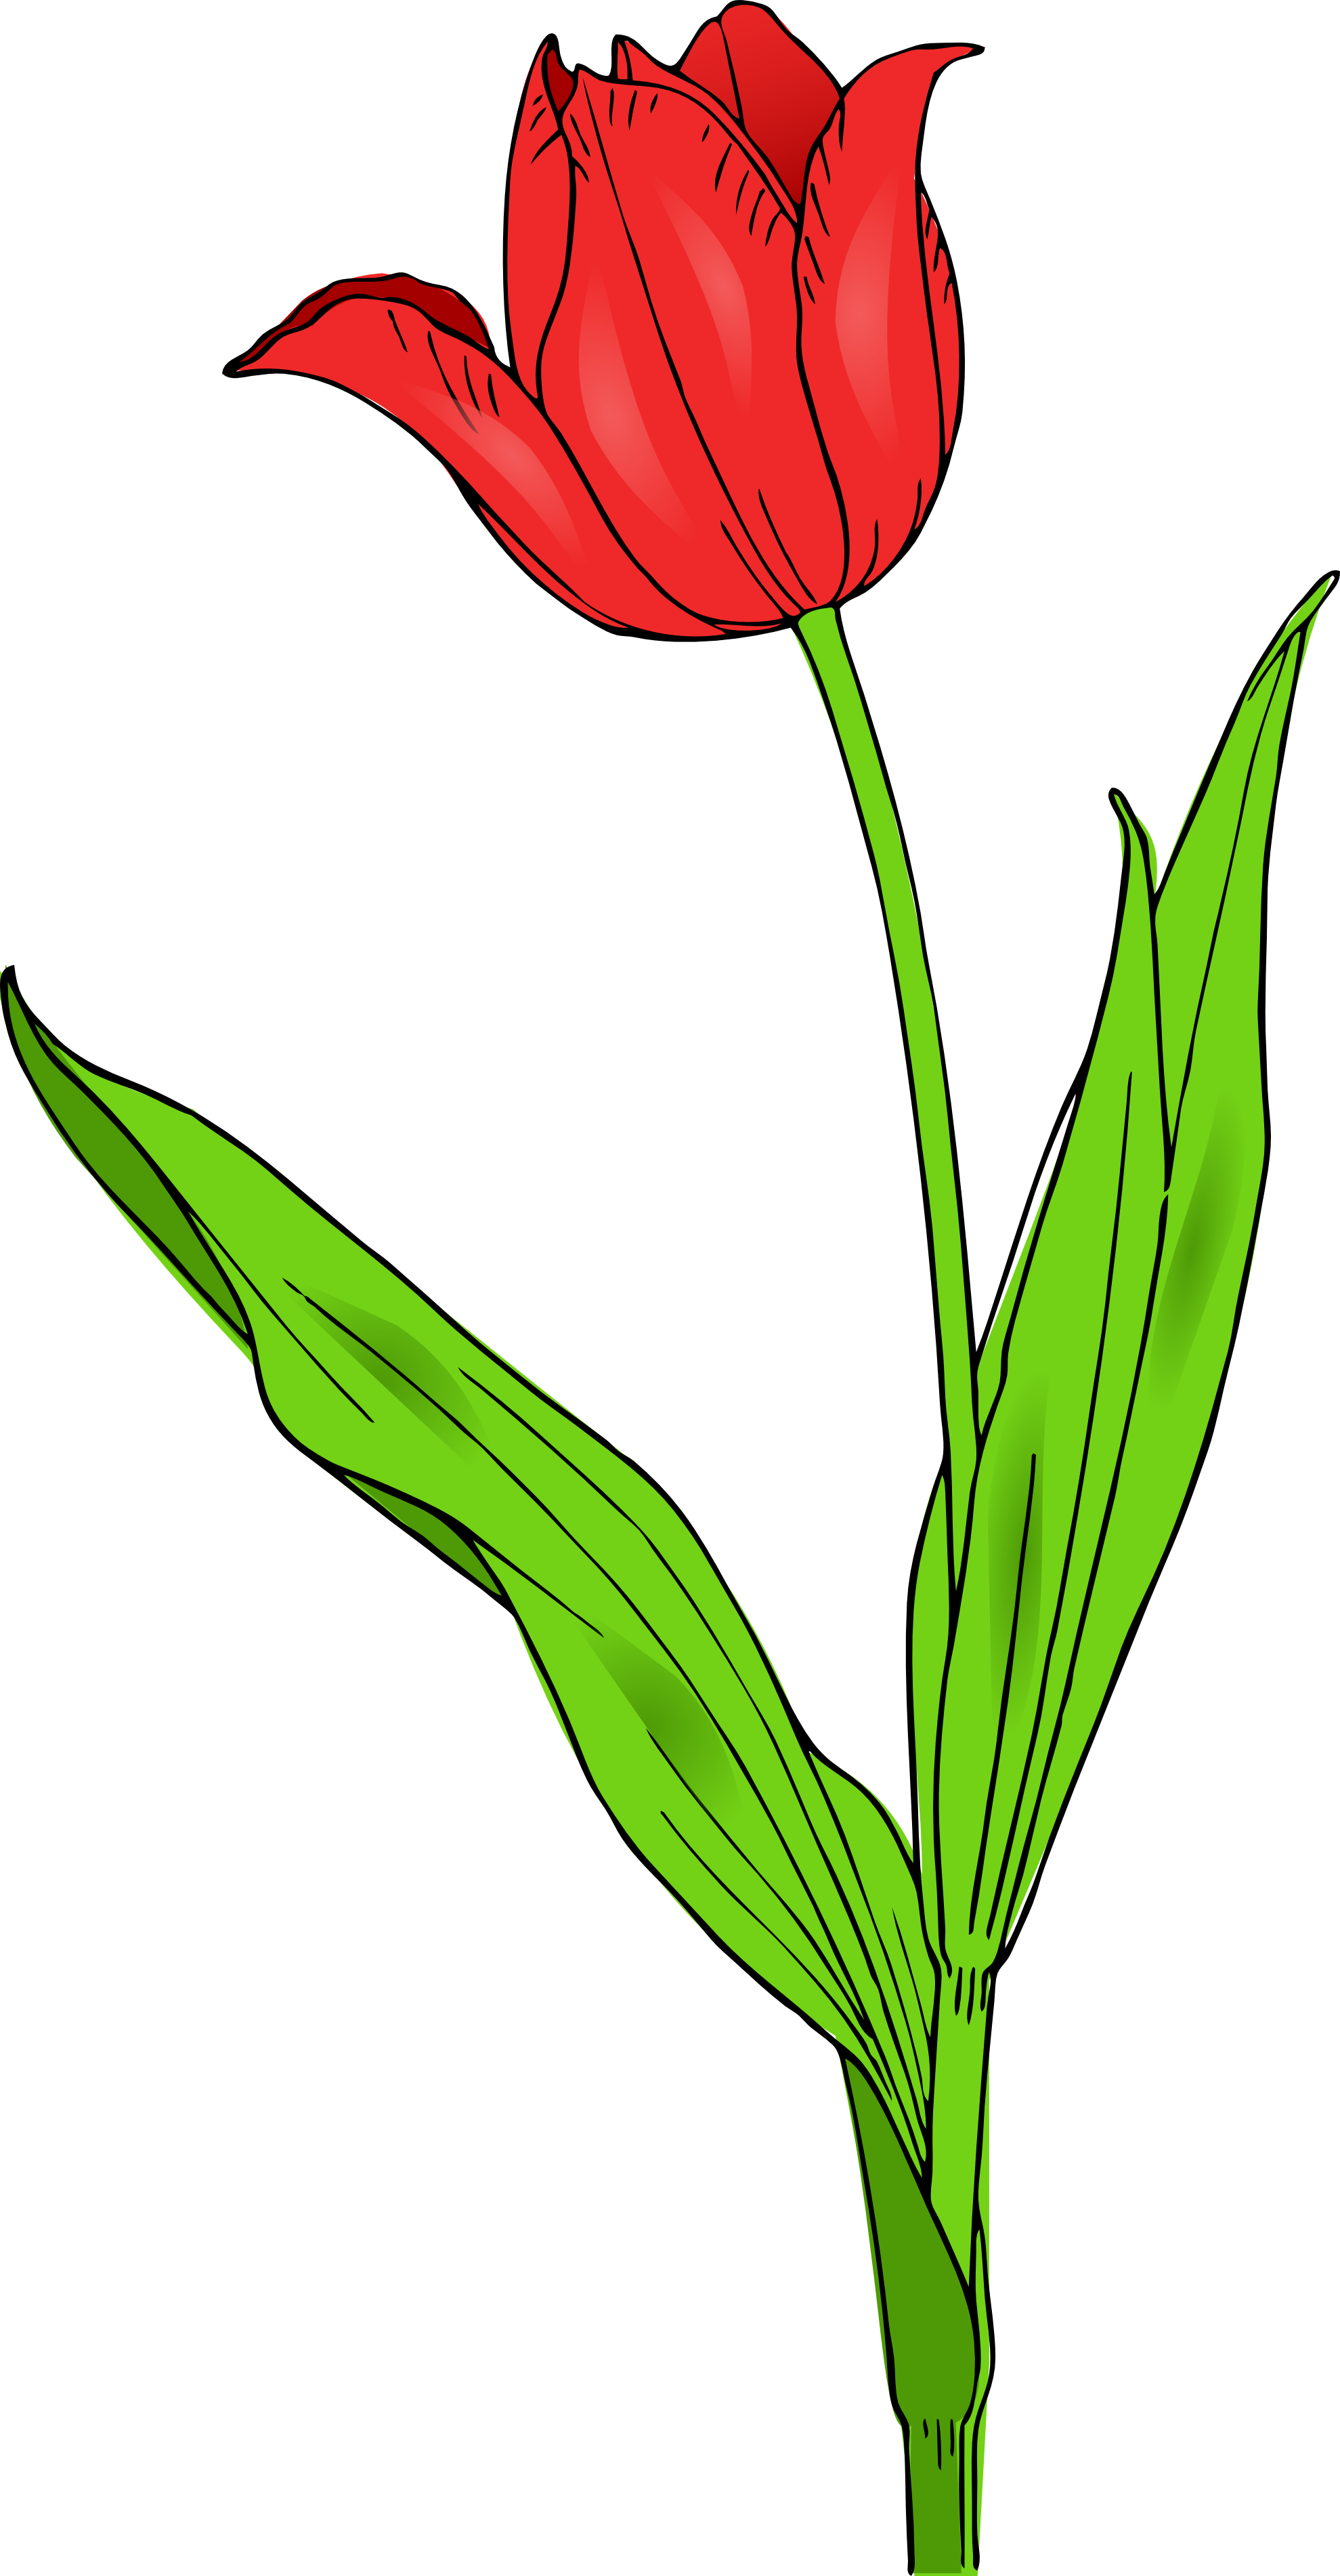 Pennant clipart carnival. Free tulip image download